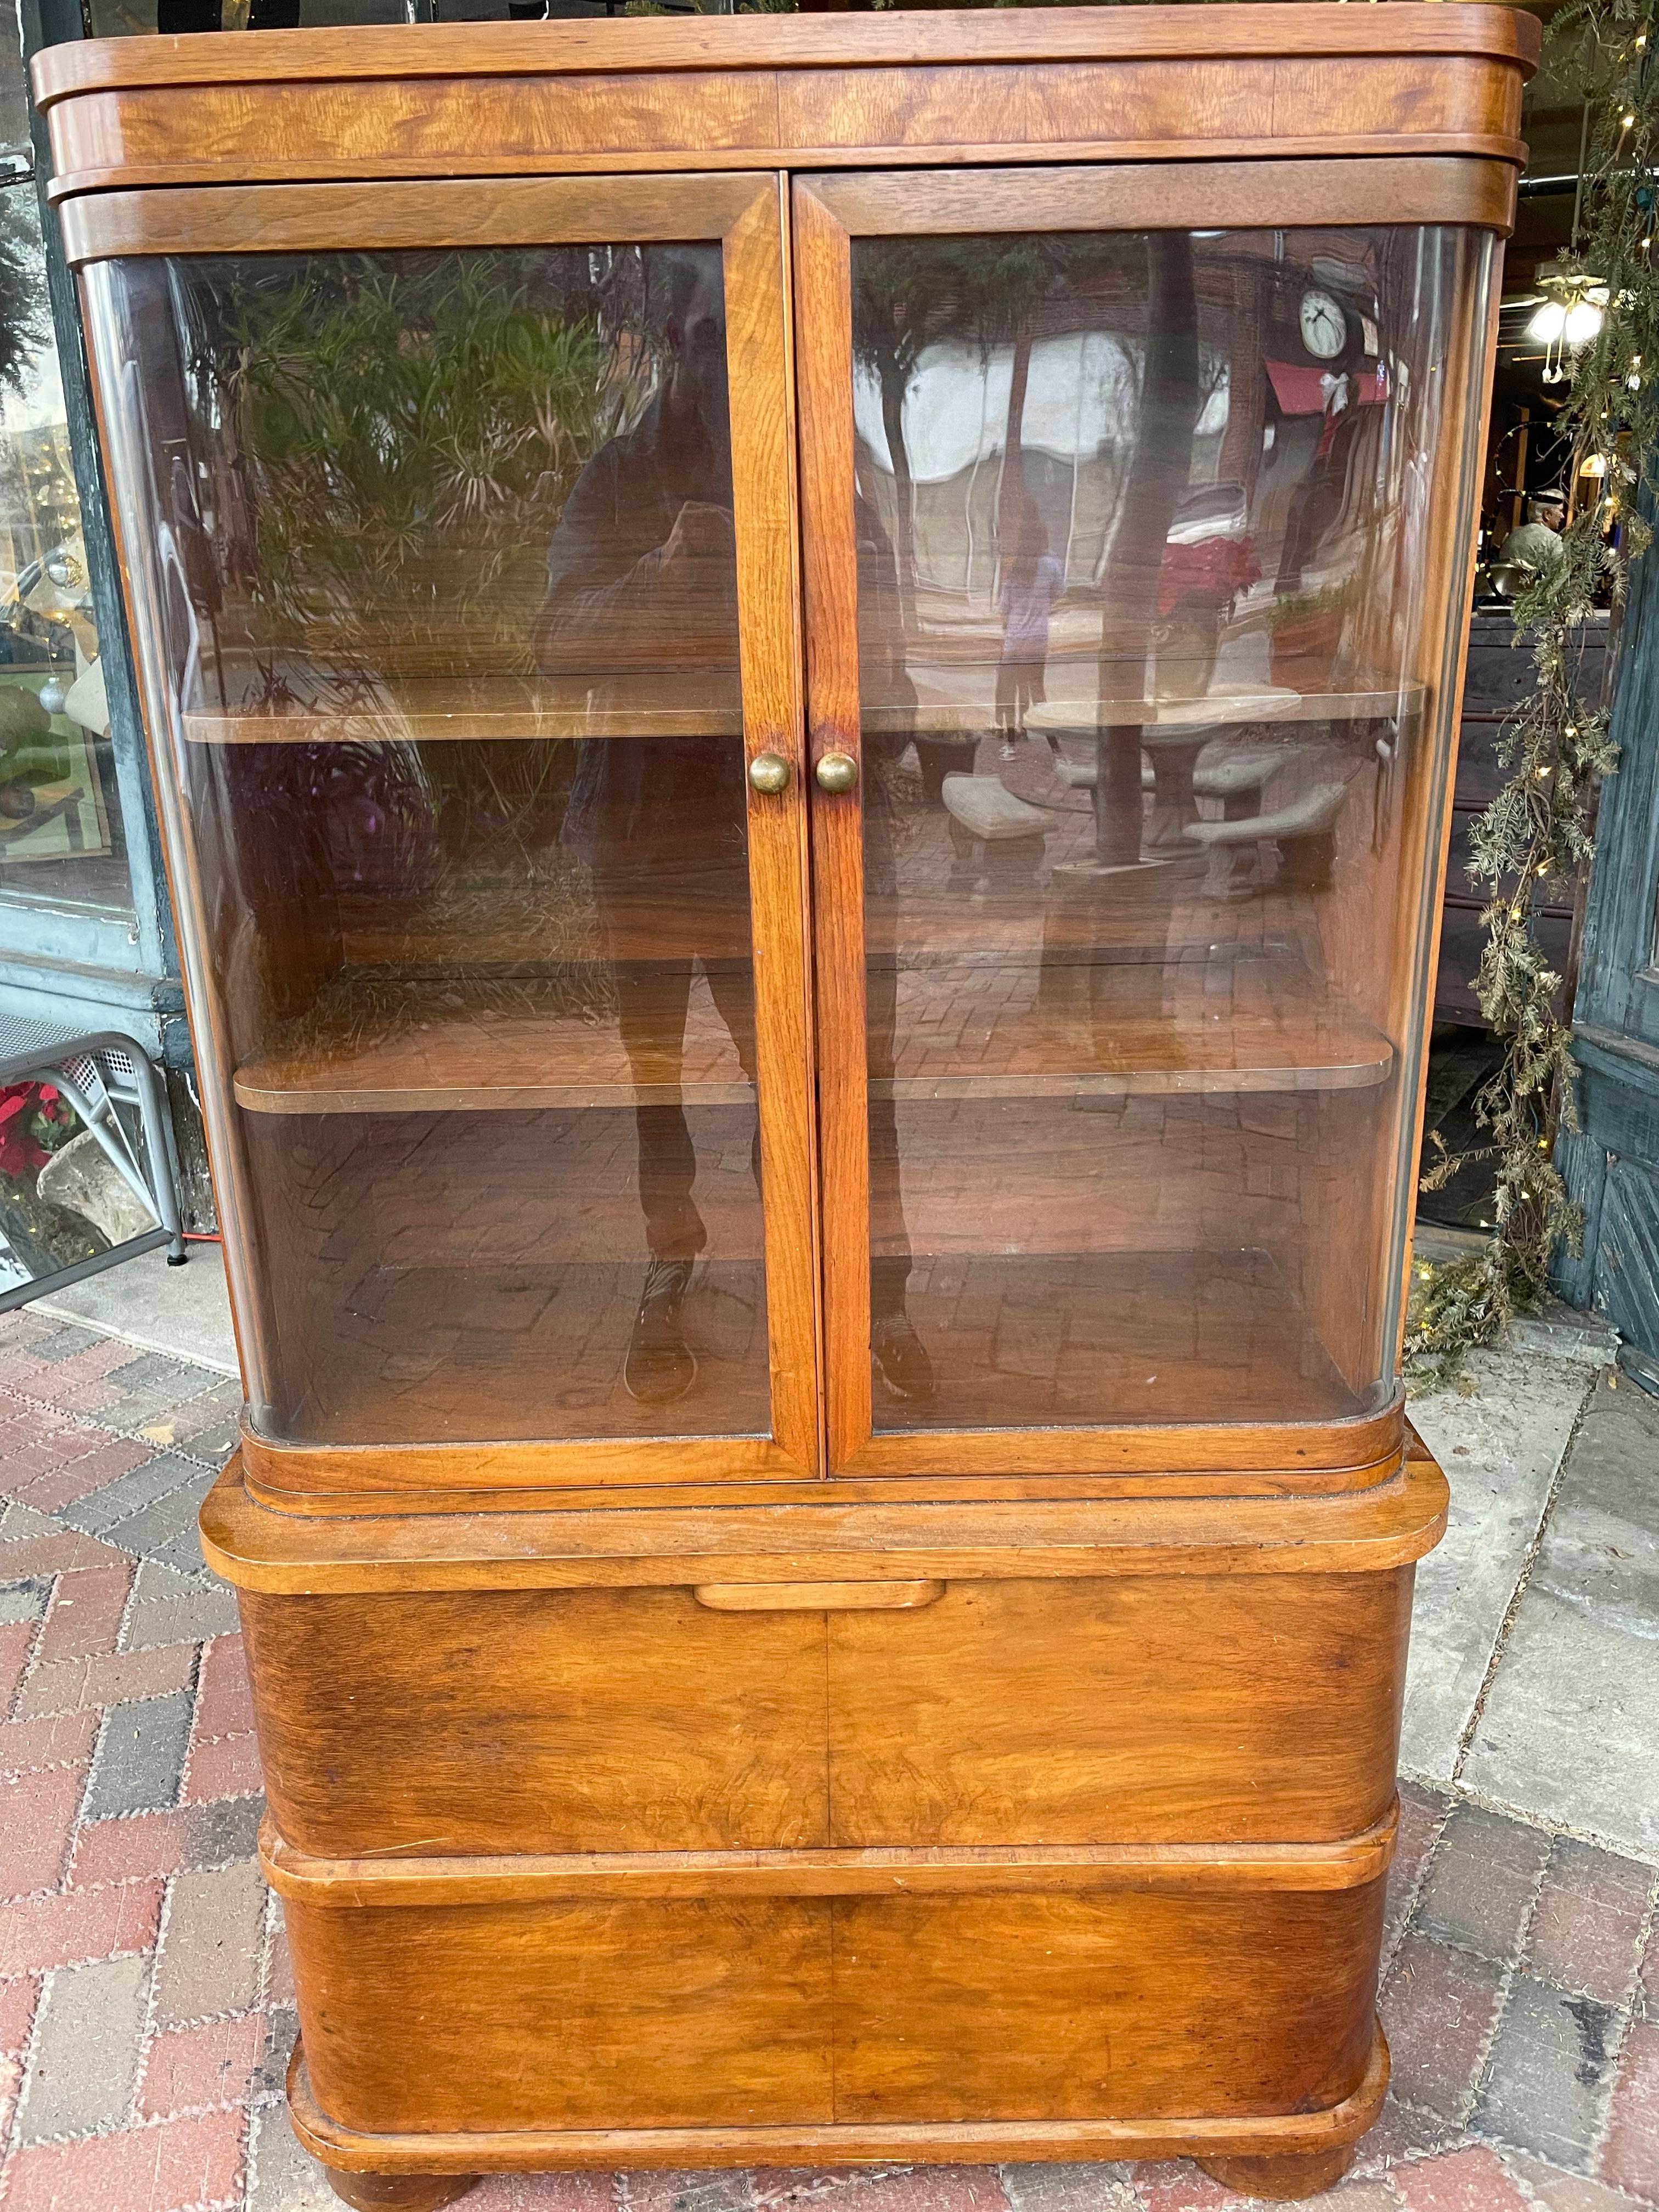 American Antique Art Deco Moderne Walnut Vitrine Display Cabinet with Curved Glass Doors